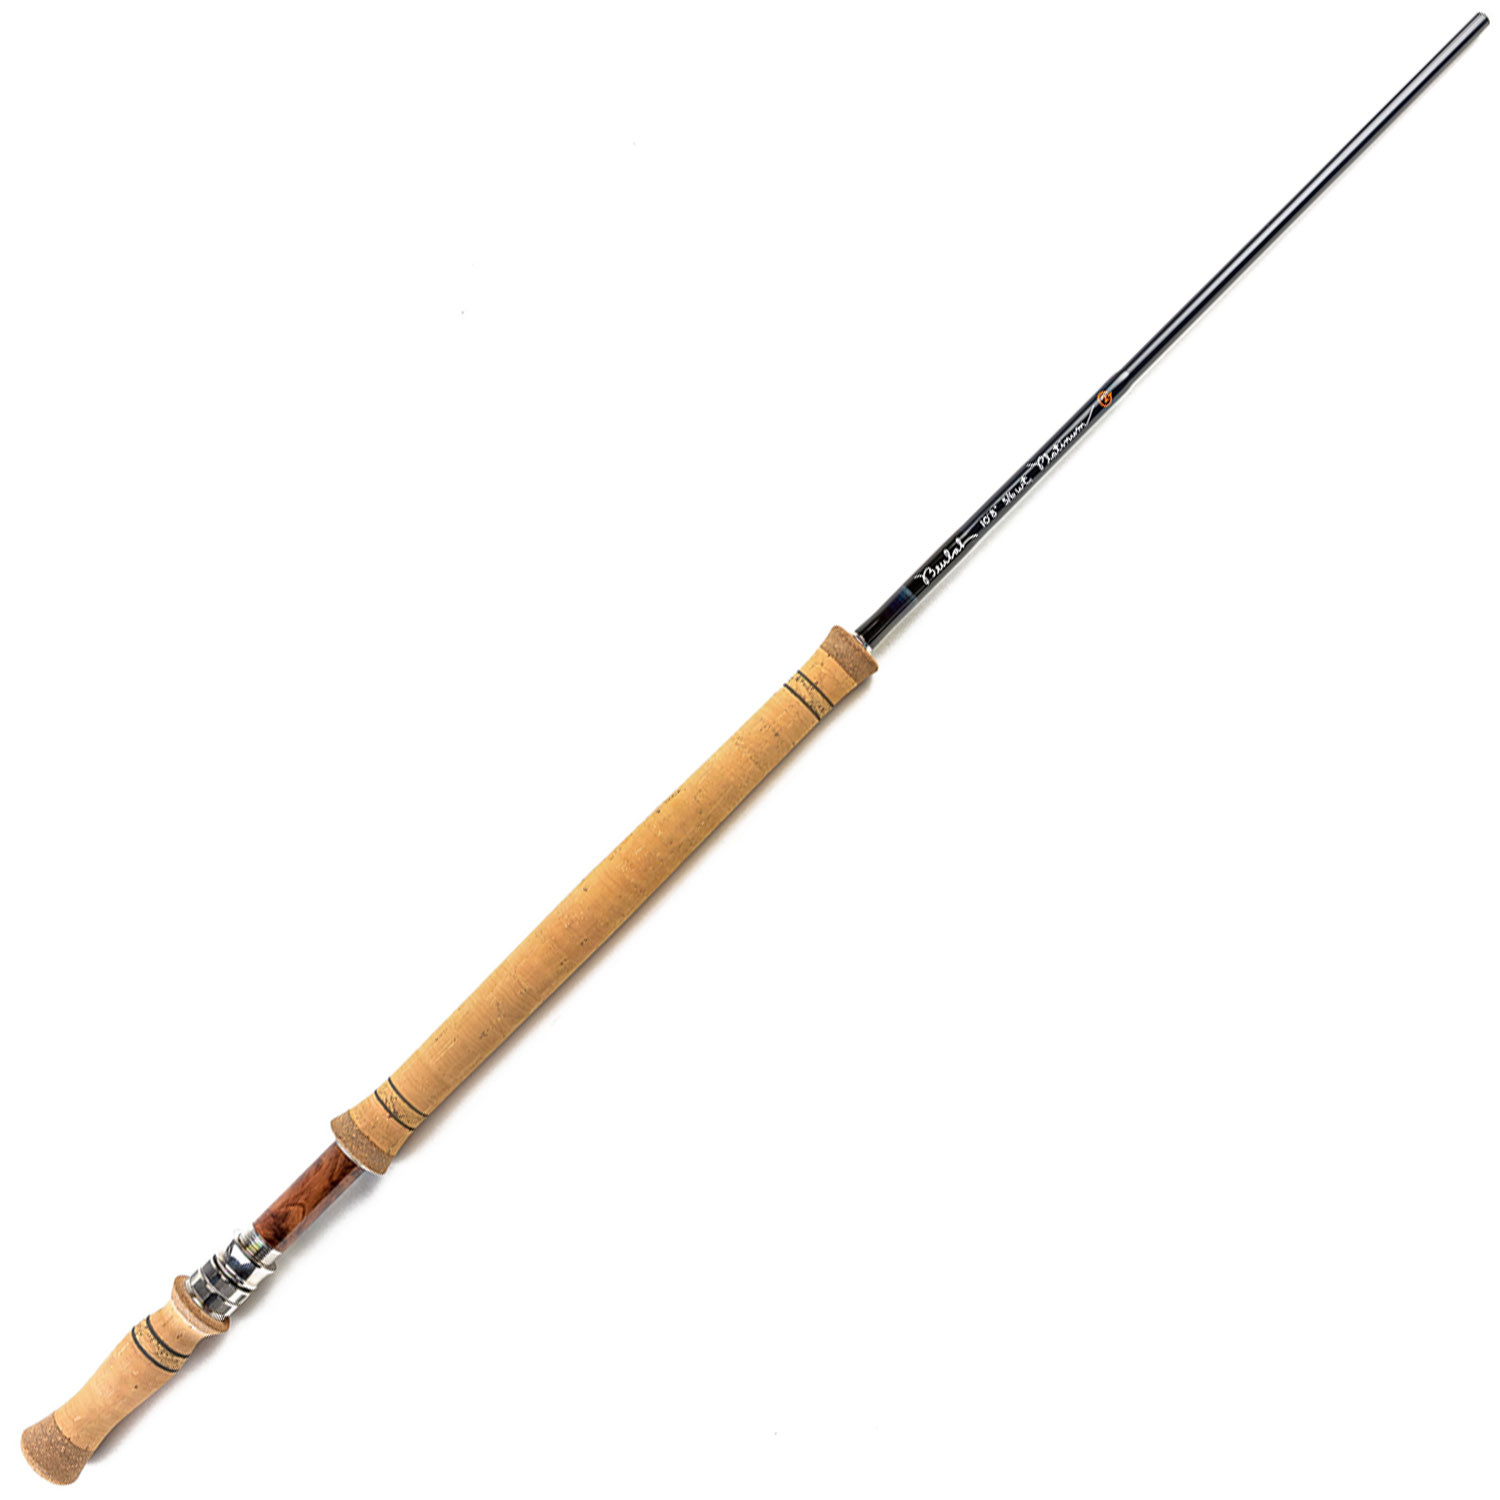 Beulah G2 Platinum Spey DH Fly Rod